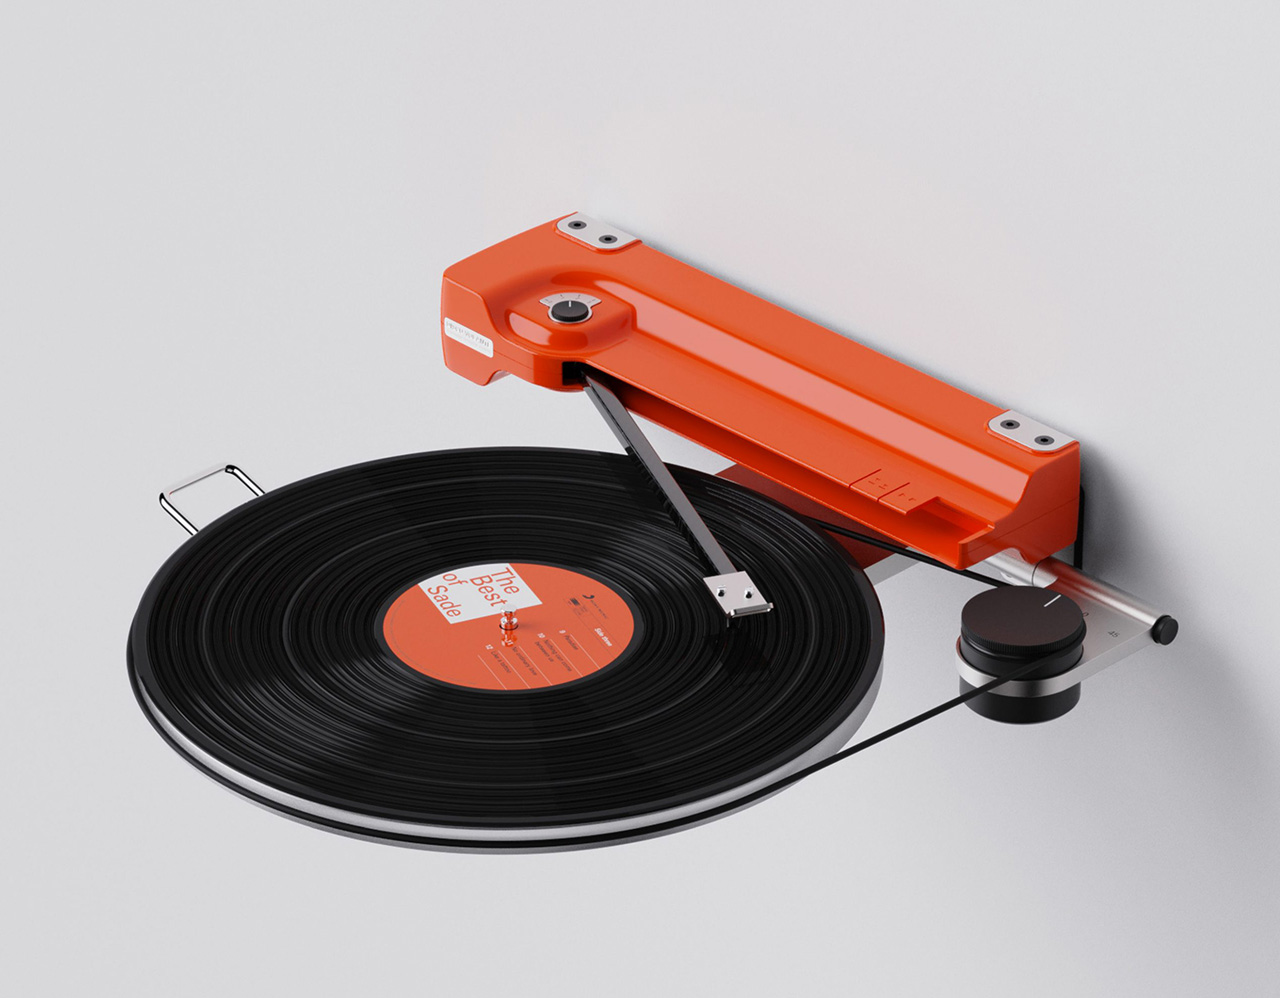 The Disco Volante Turntable Revolves Around Identified Flying Objects